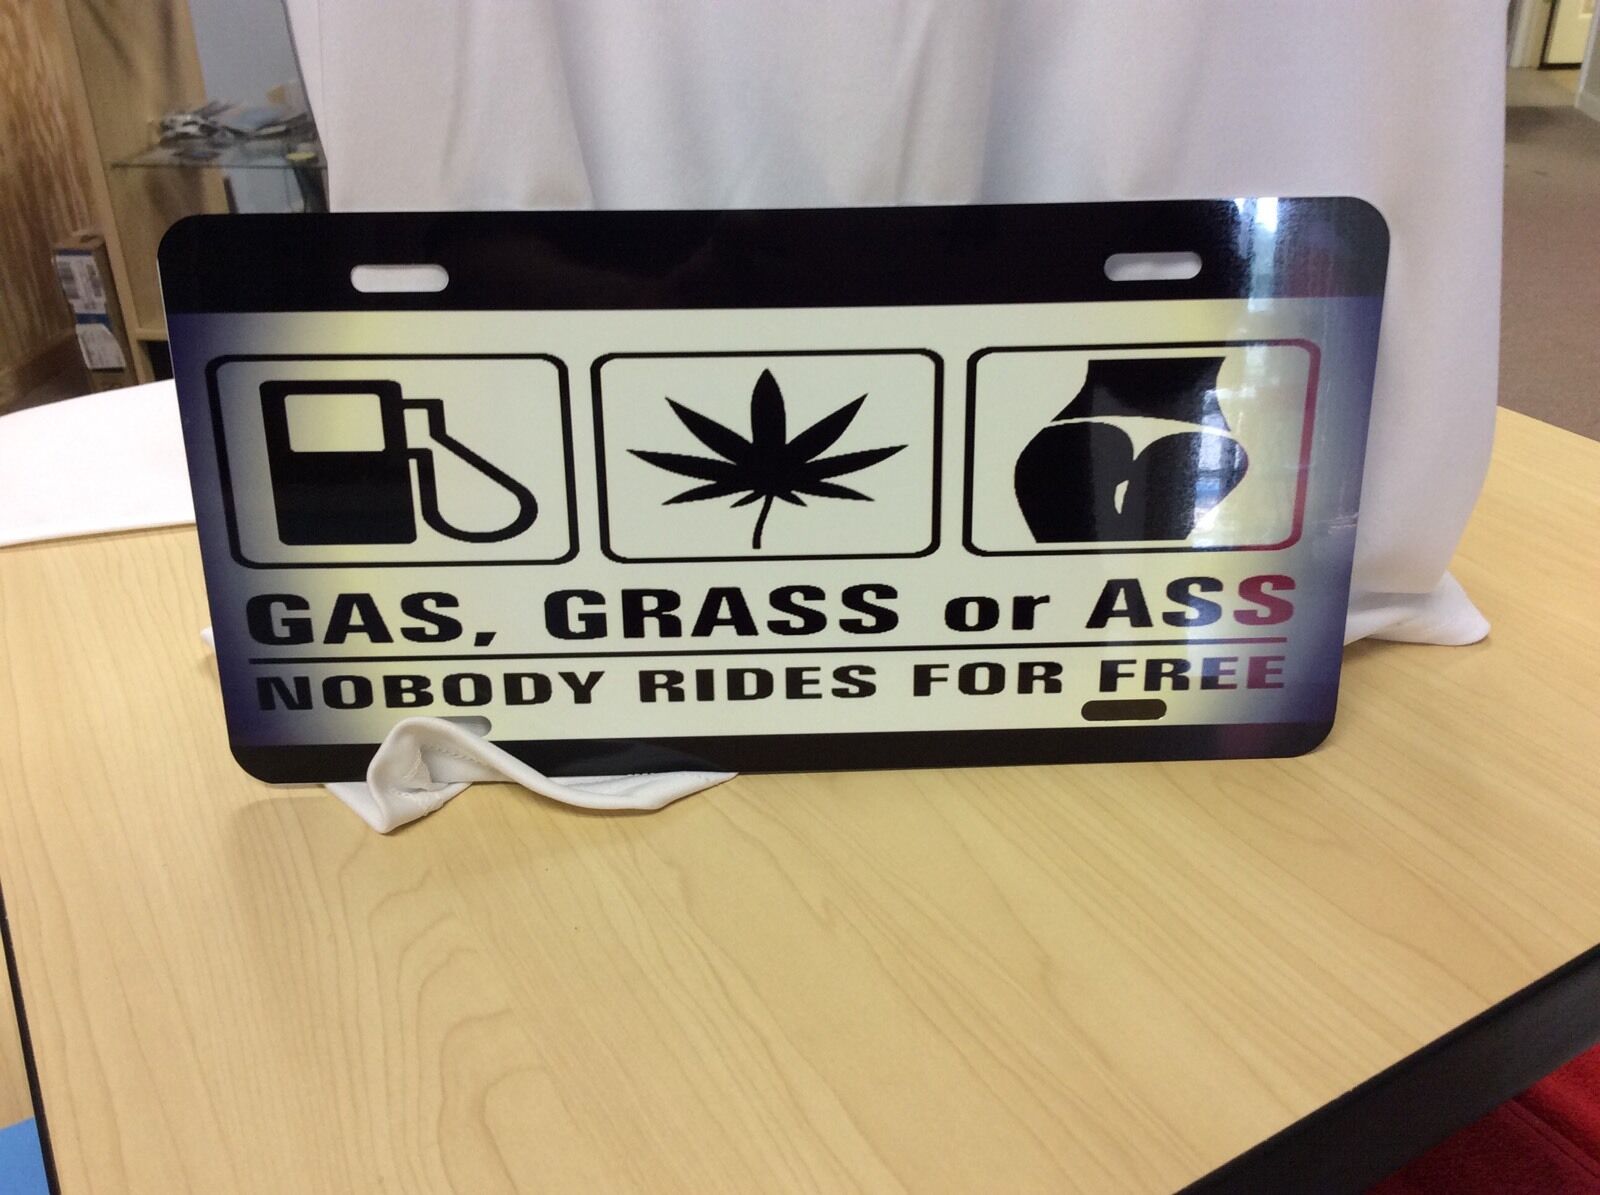 GAS,GRASS OR ASS 70s-80s STYLE NOVELTY VANITY LICENSE PLATE MADE IN U.S.A.